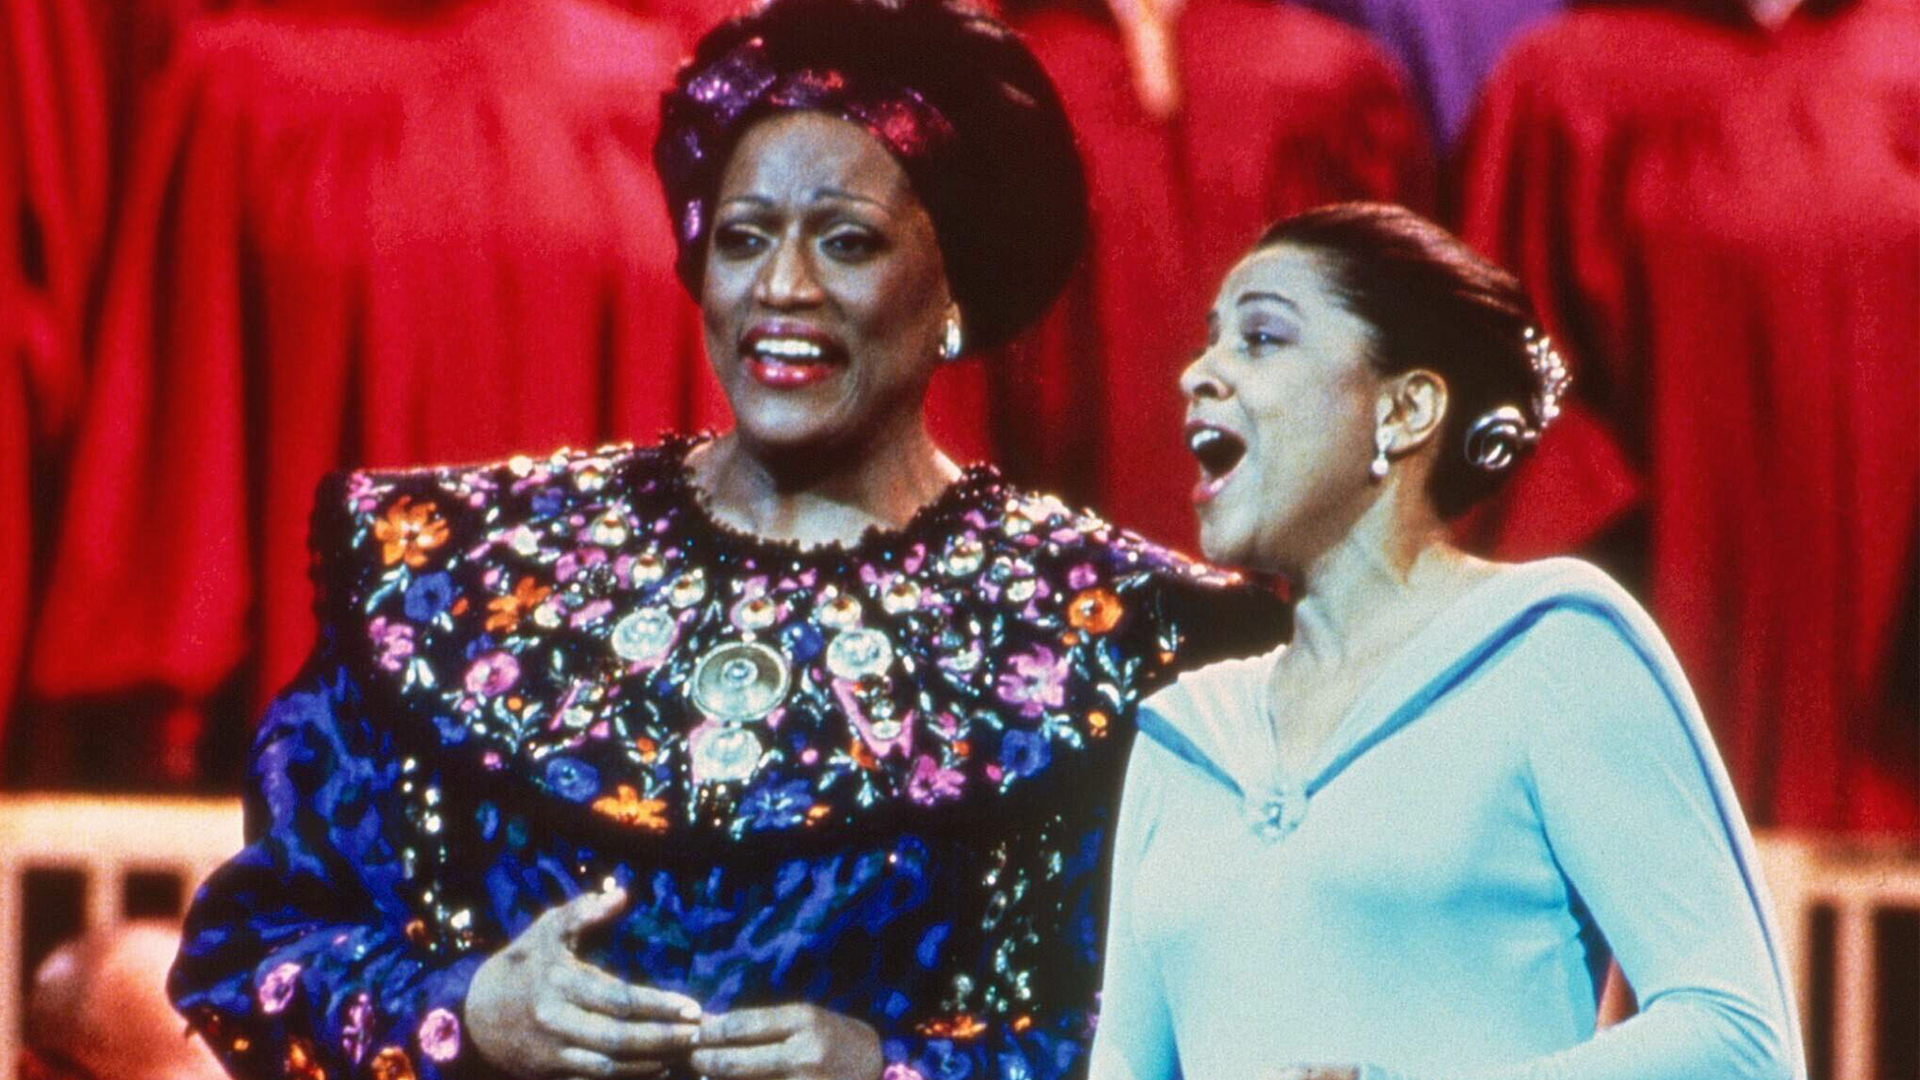 Two Black woman stand on stage singing. The woman on the left wears a blue dress with a floral collar and the woman on the right ears a light blue dress.